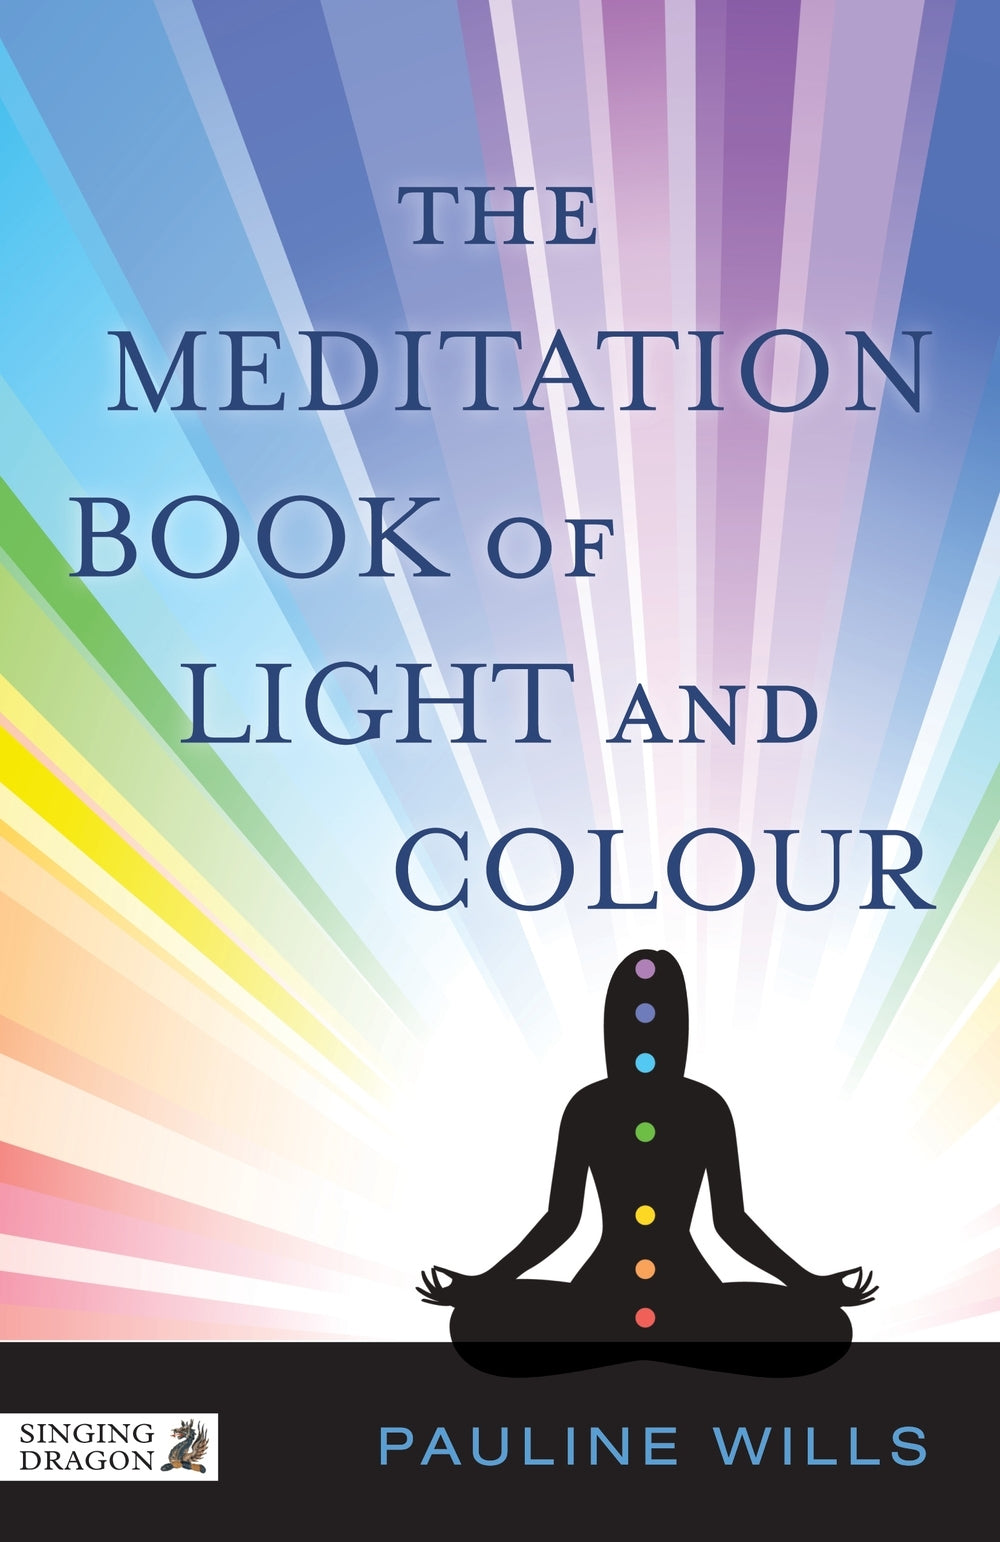 The Meditation Book of Light and Colour by Pauline Wills